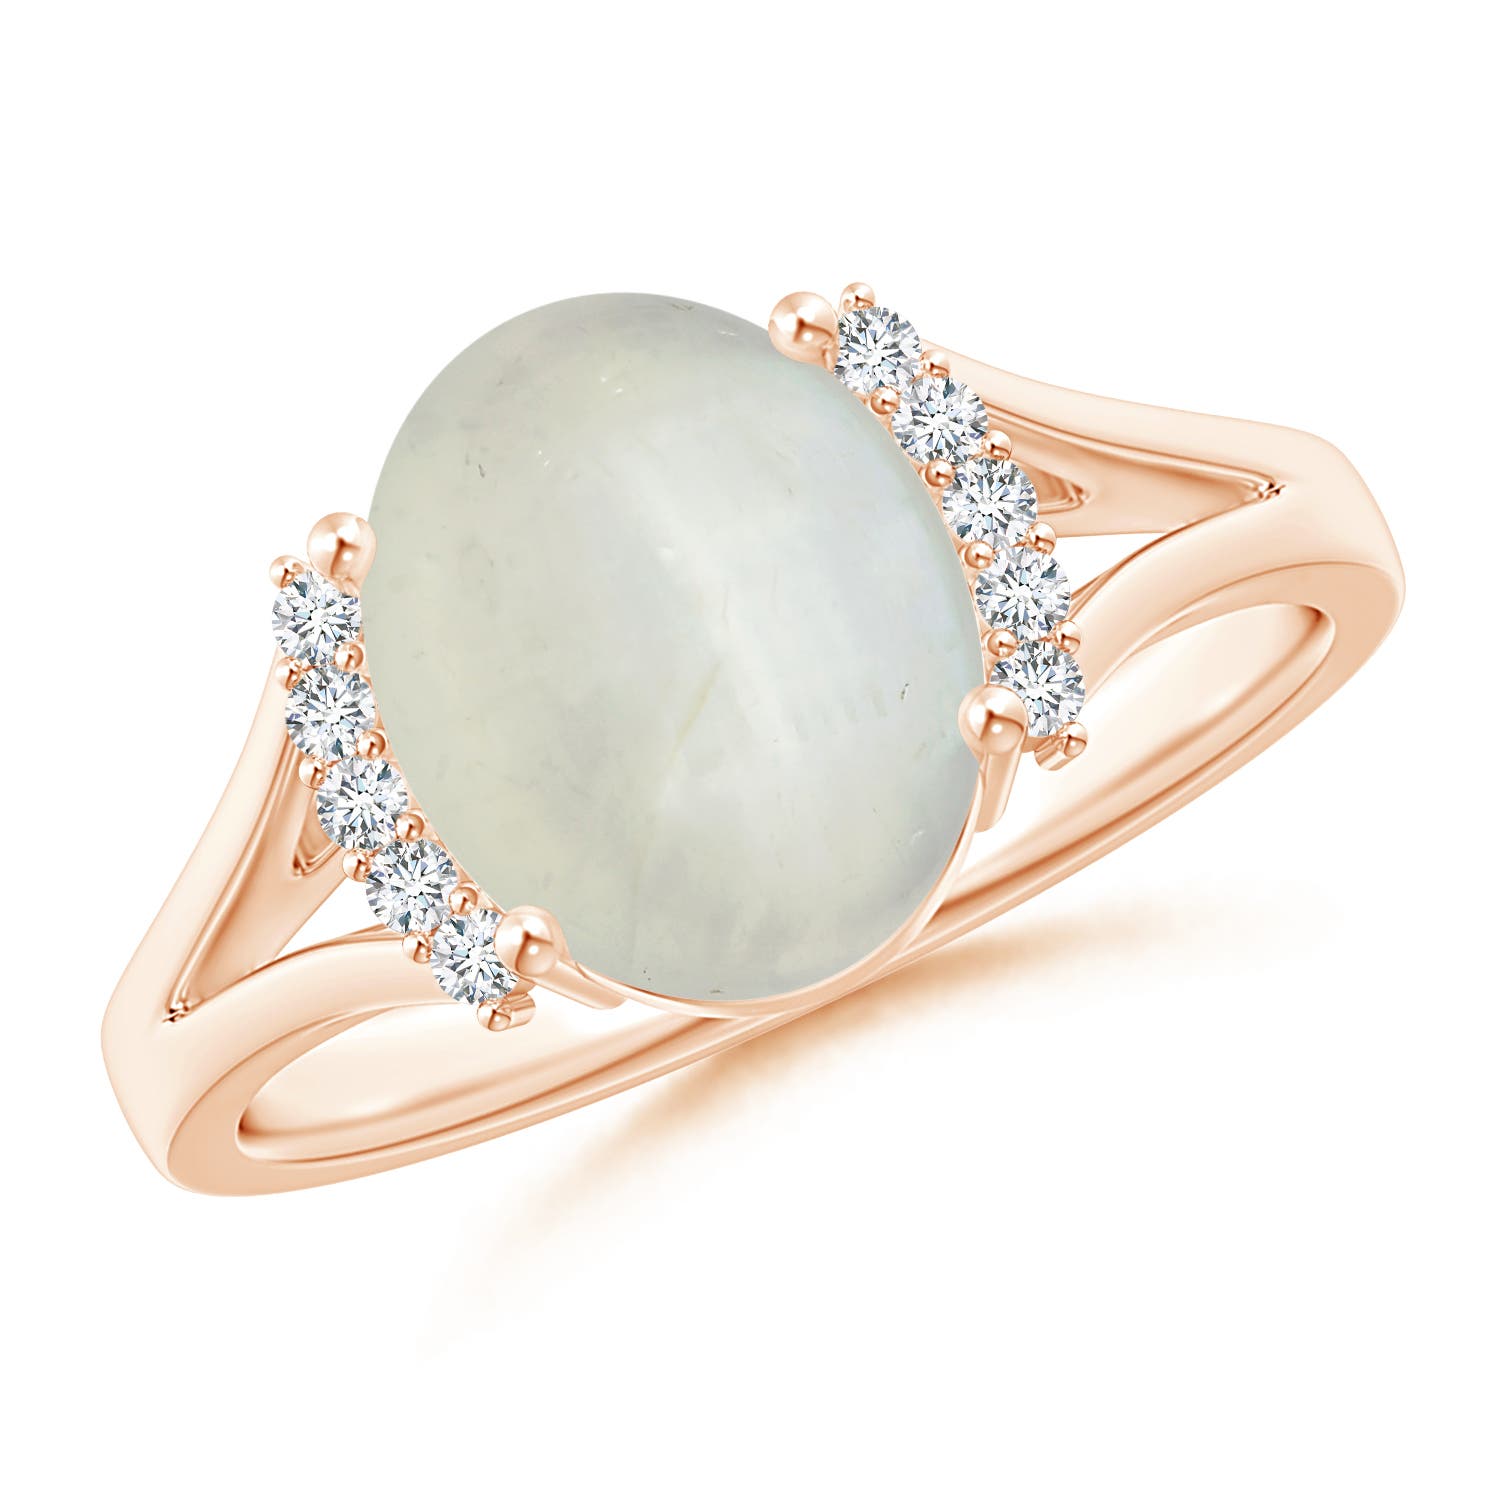 AA - Moonstone / 2.6 CT / 14 KT Rose Gold